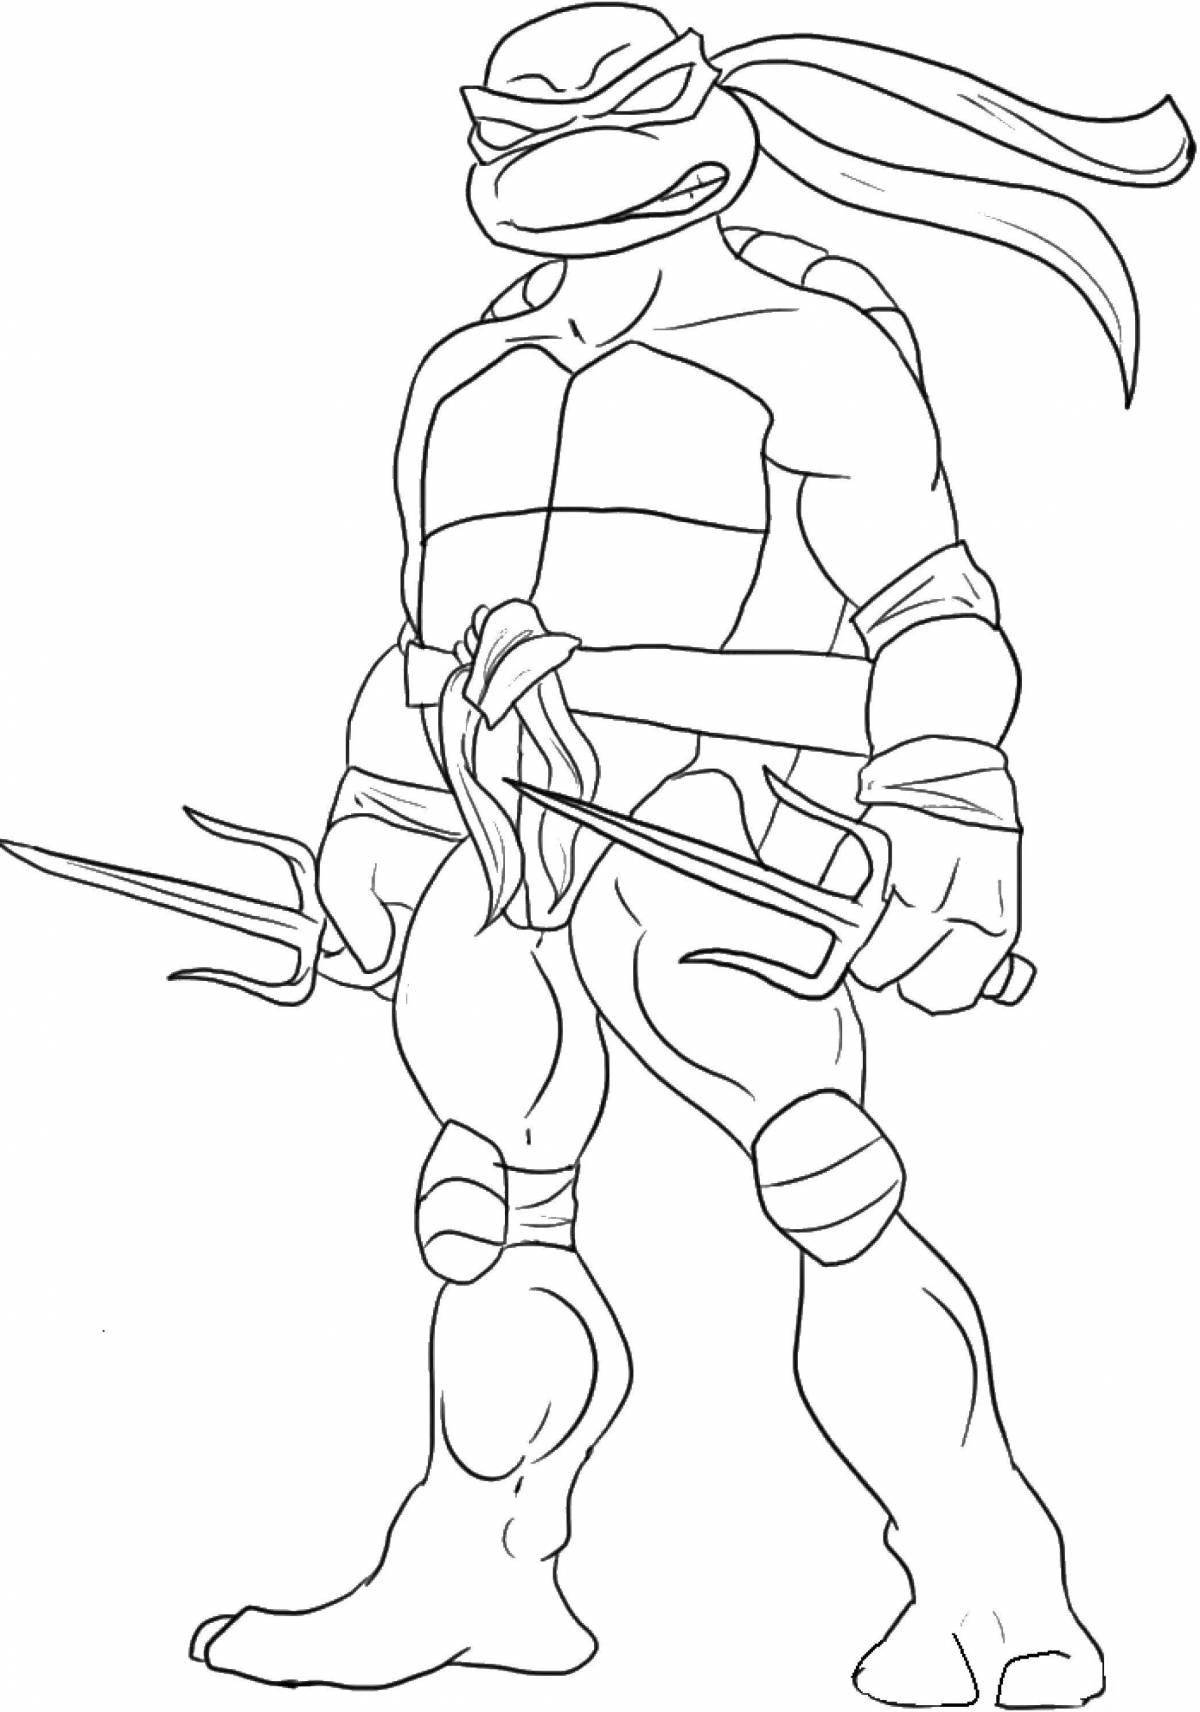 Ninja Turtles coloring pages for kids